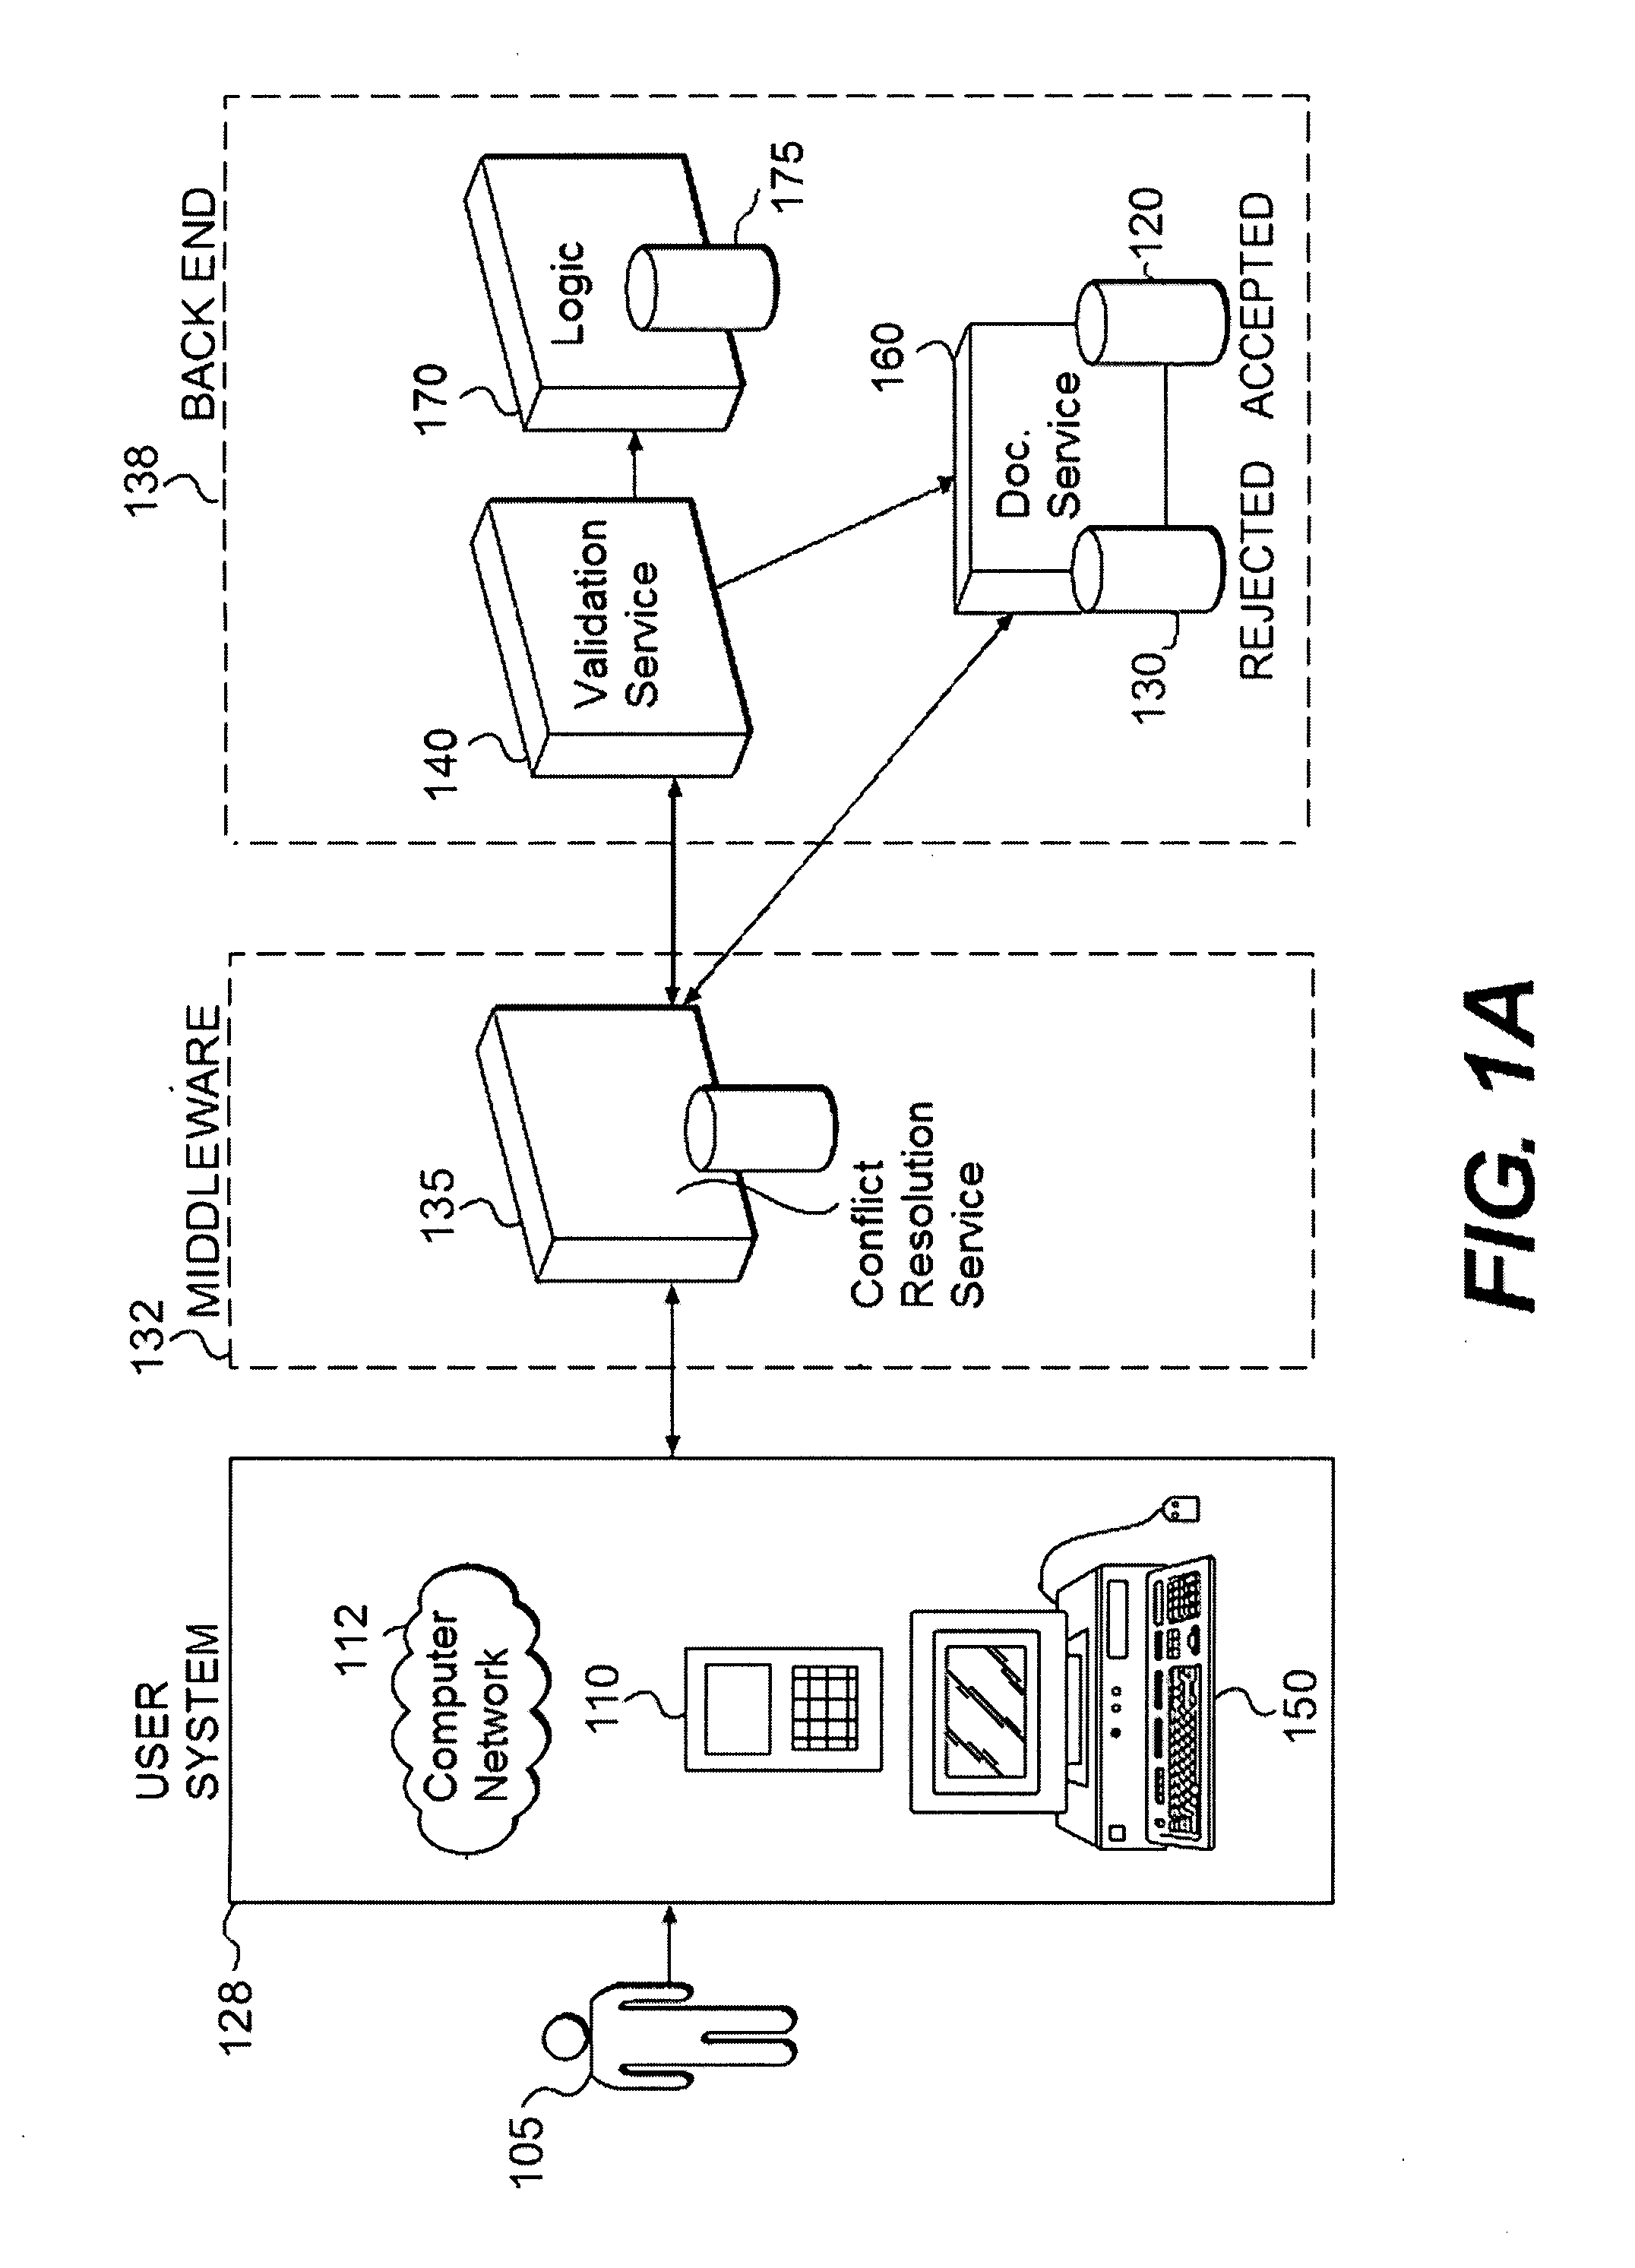 Methods and systems for storing and retrieving rejected data